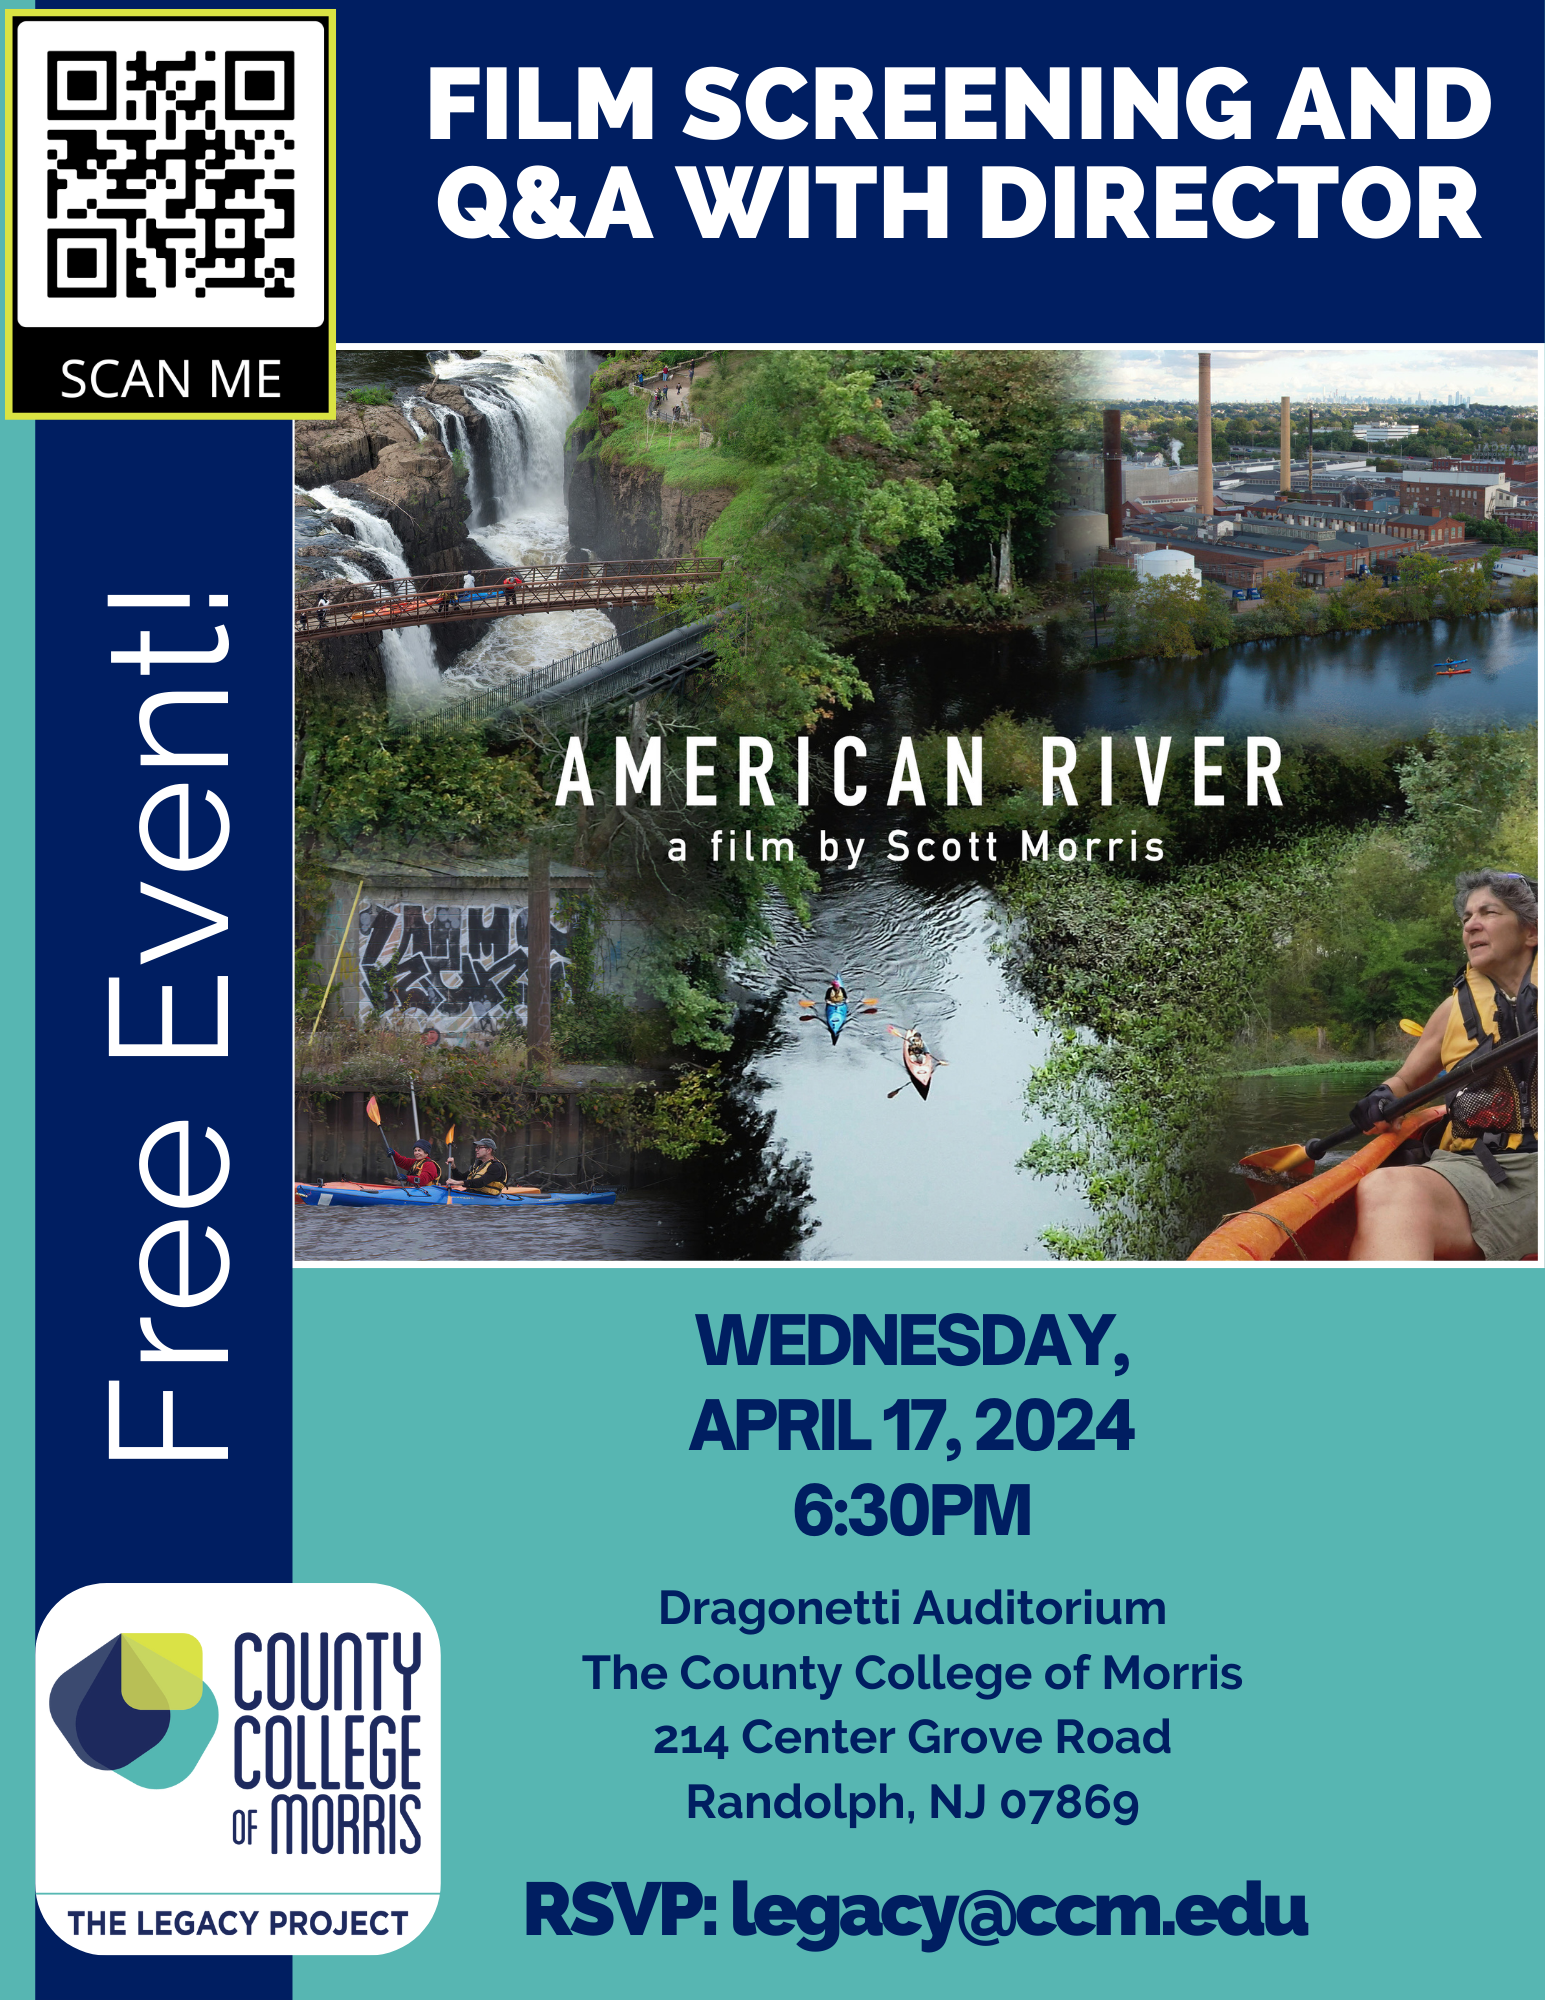 "American River" Film Screening and Director Q&A